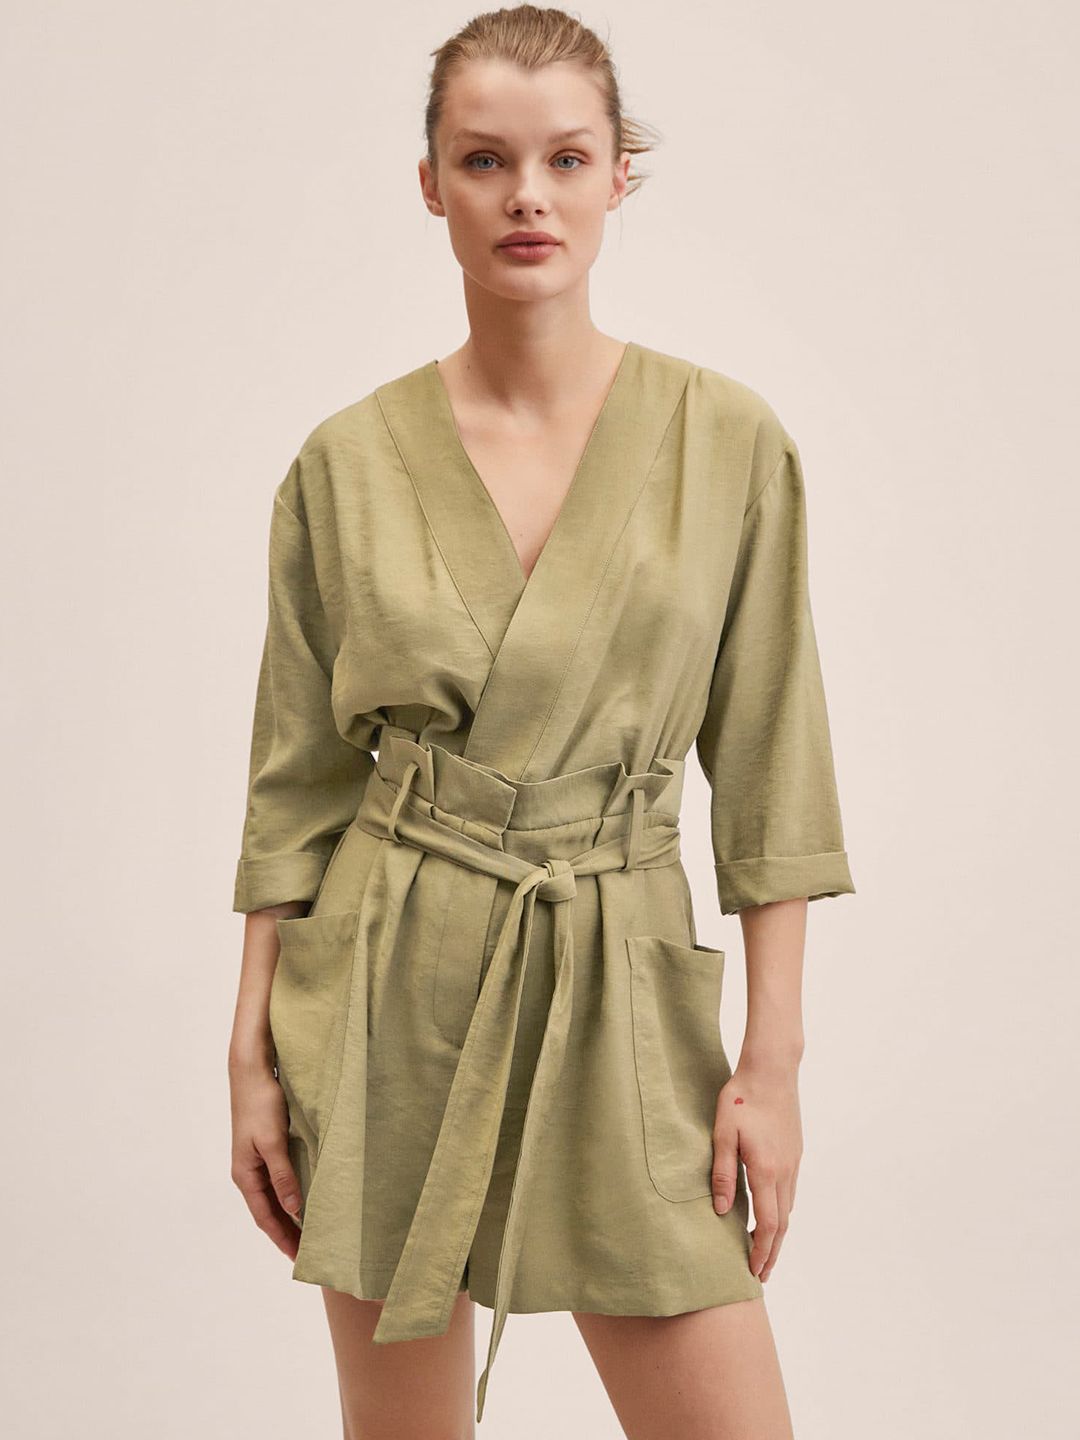 MANGO Women Olive Green Solid Playsuit Comes With a Belt Price in India